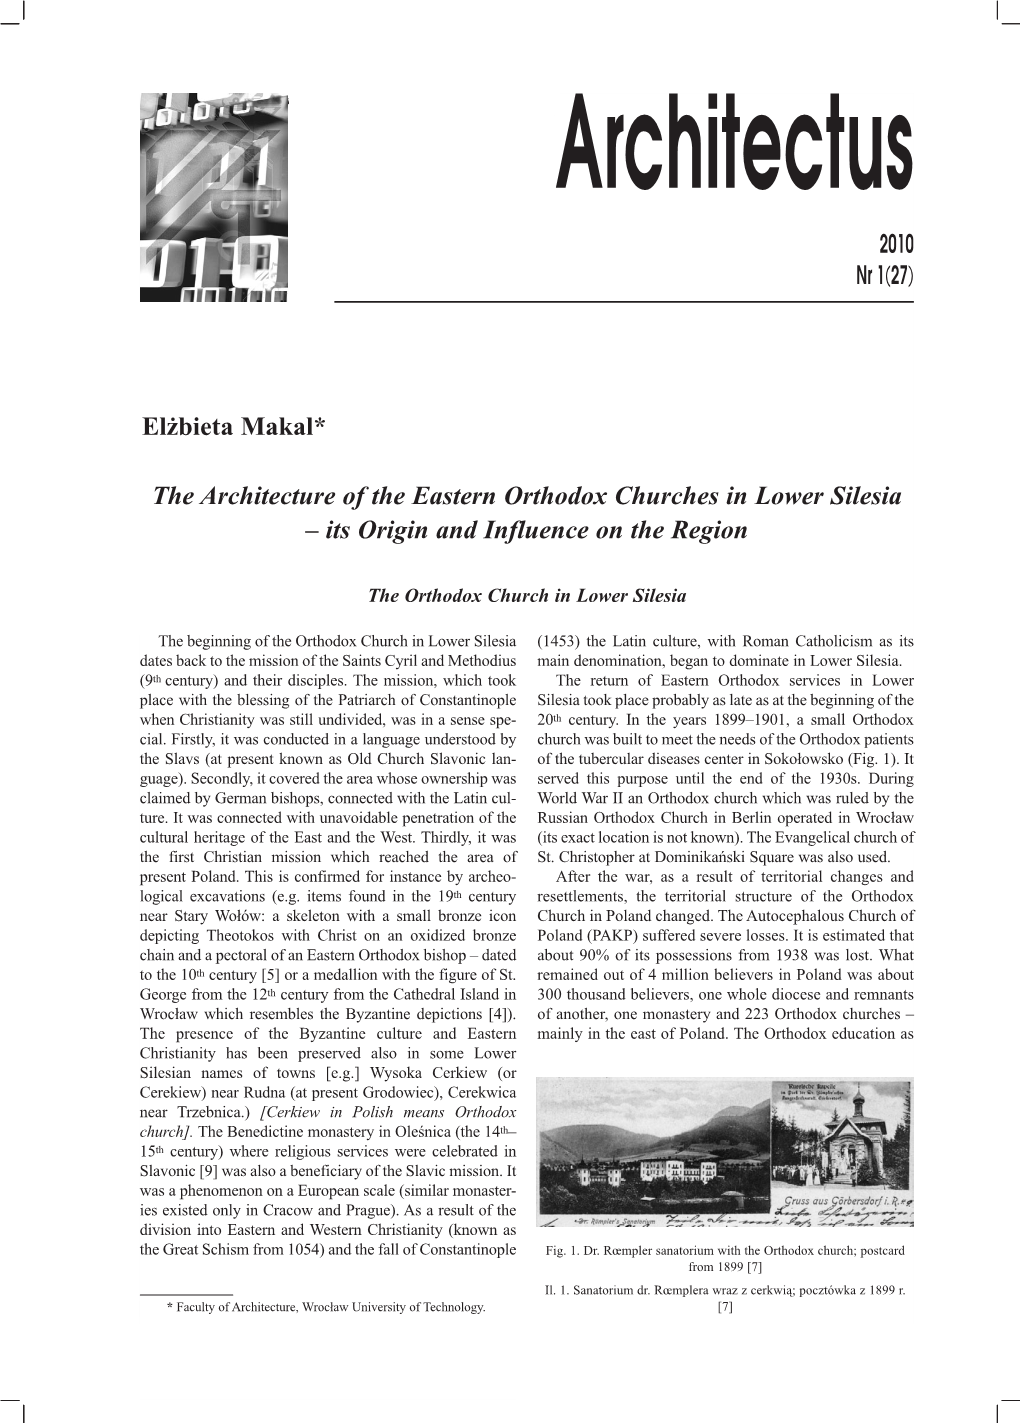 Elżbieta Makal* the Architecture of the Eastern Orthodox Churches in Lower Silesia – Its Origin and Influence on the Region